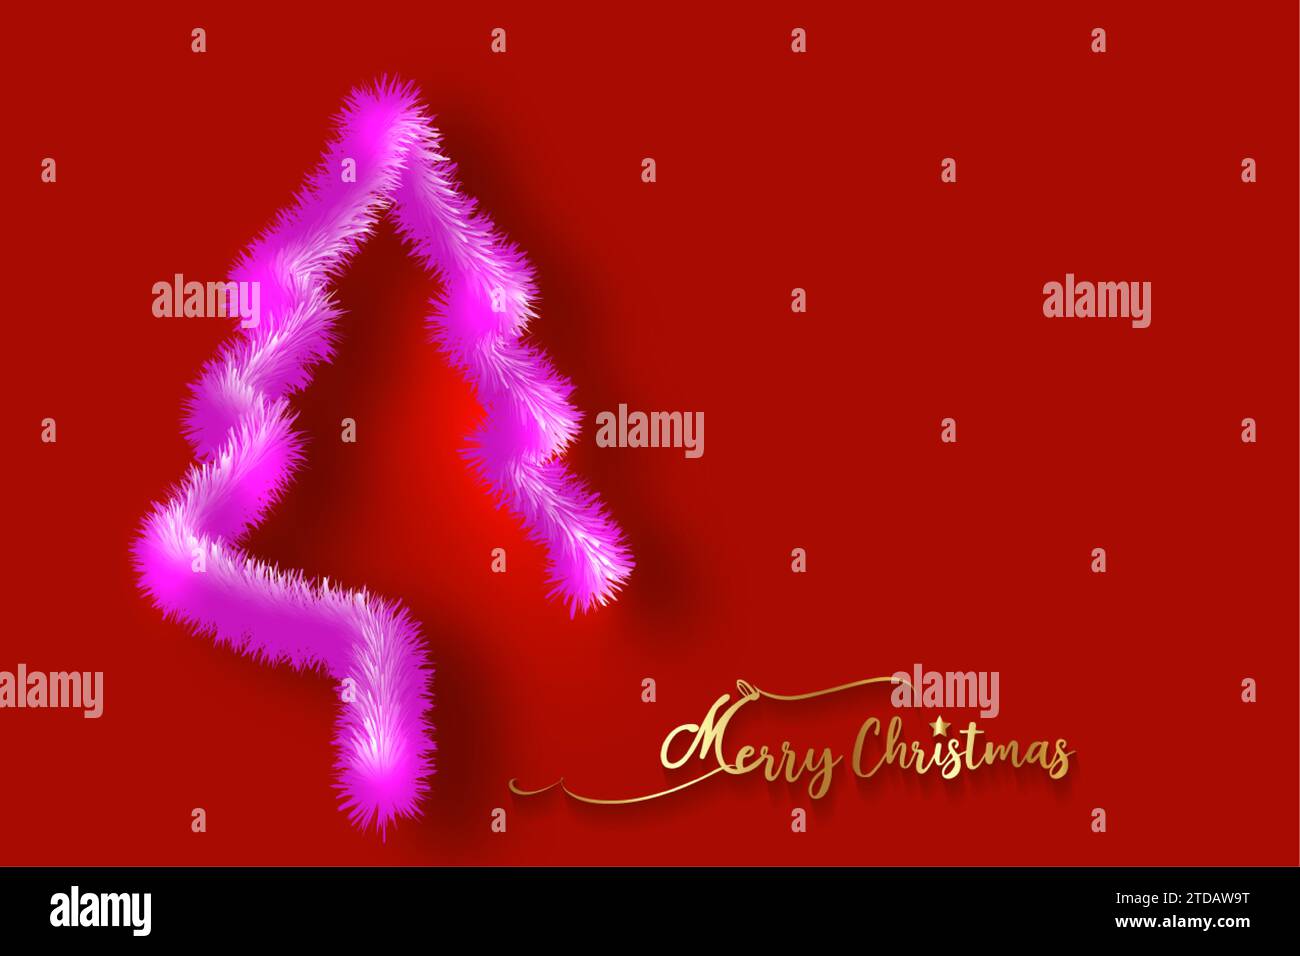 Christmas Tree background and  Merry Christmas gold calligraphy. pink Fir tree symbol in fur effect style. Holidays vector red template Stock Vector